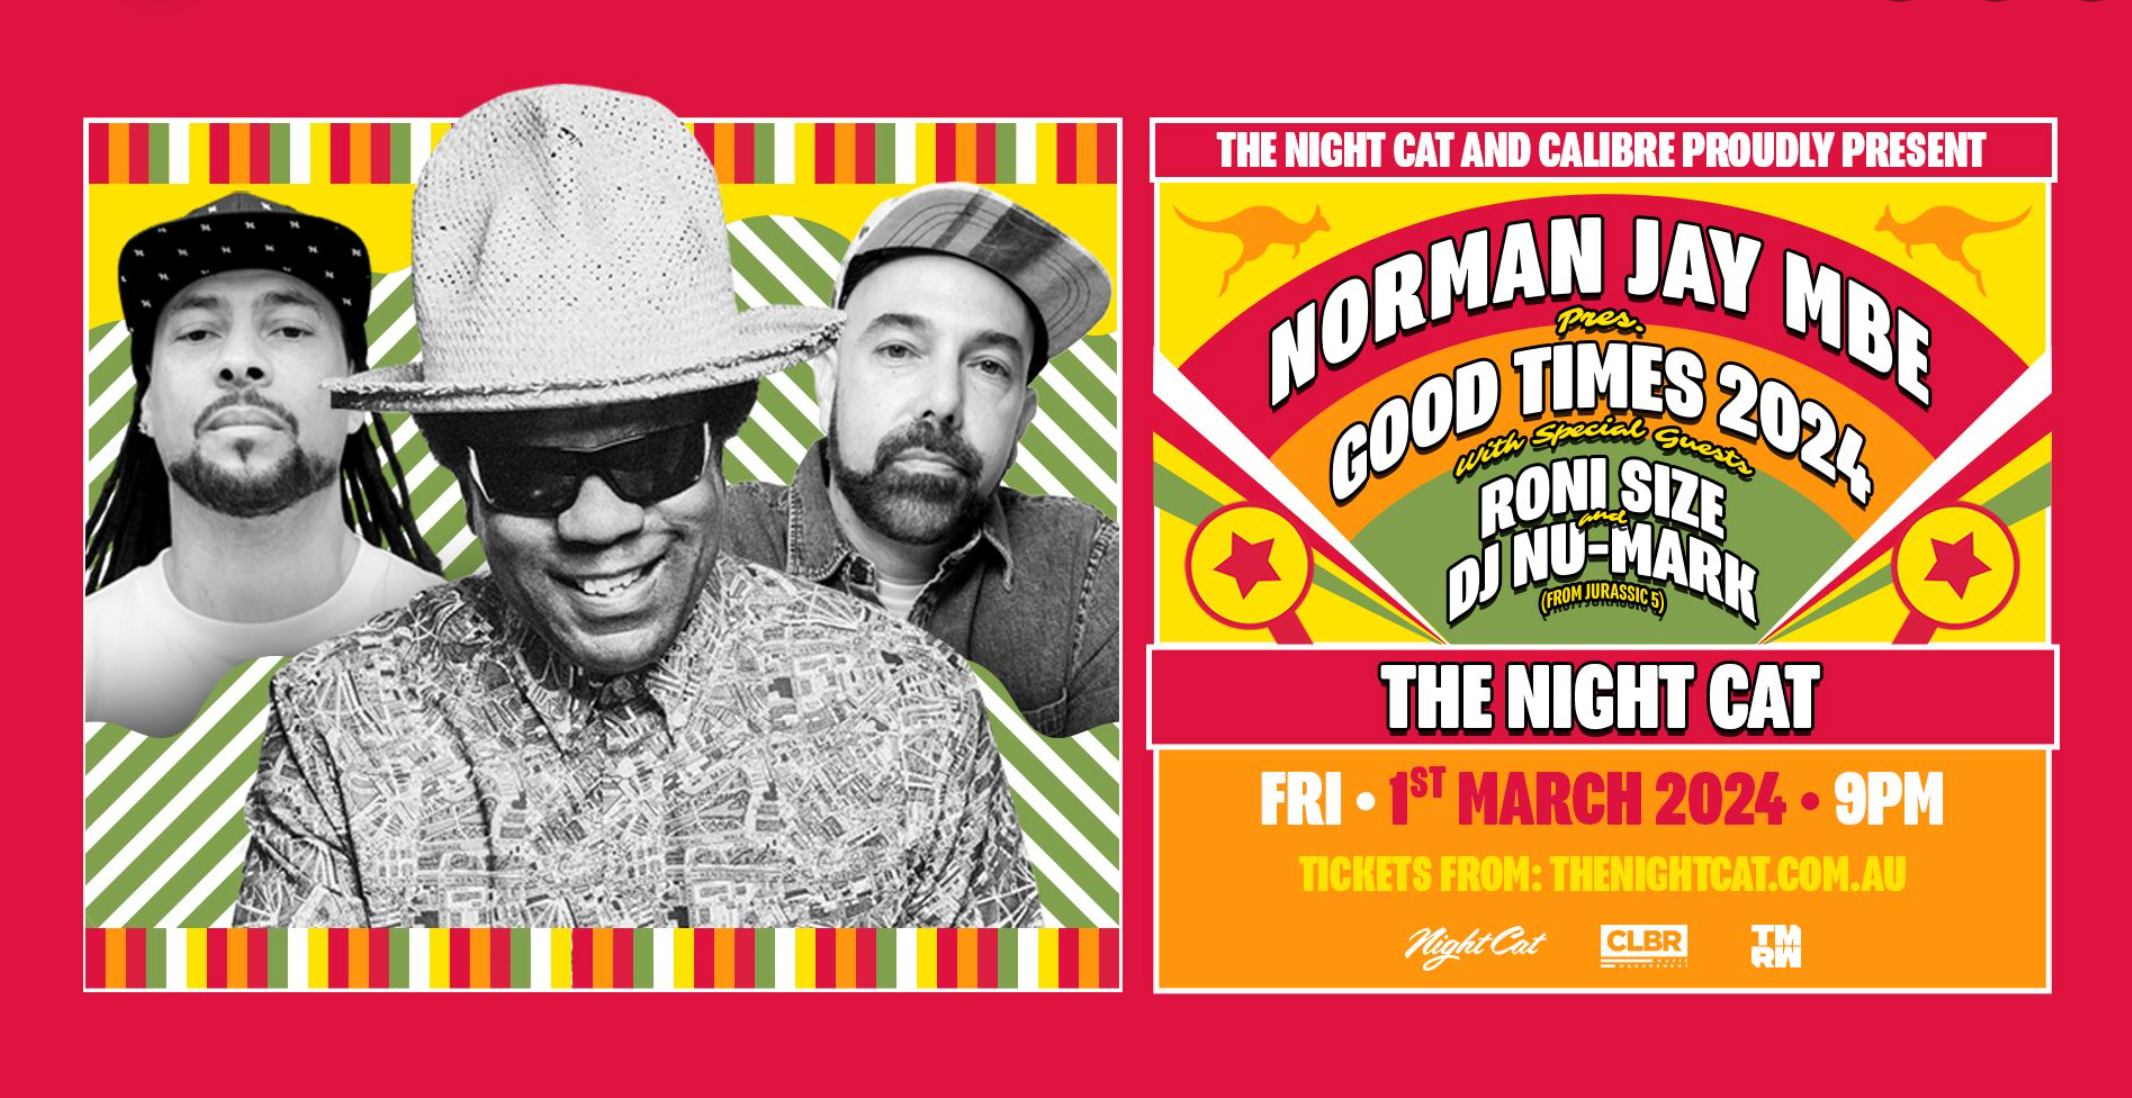 Good Times feat. Norman Jay MBE, Roni Size & DJ Nu-mark - フライヤー表